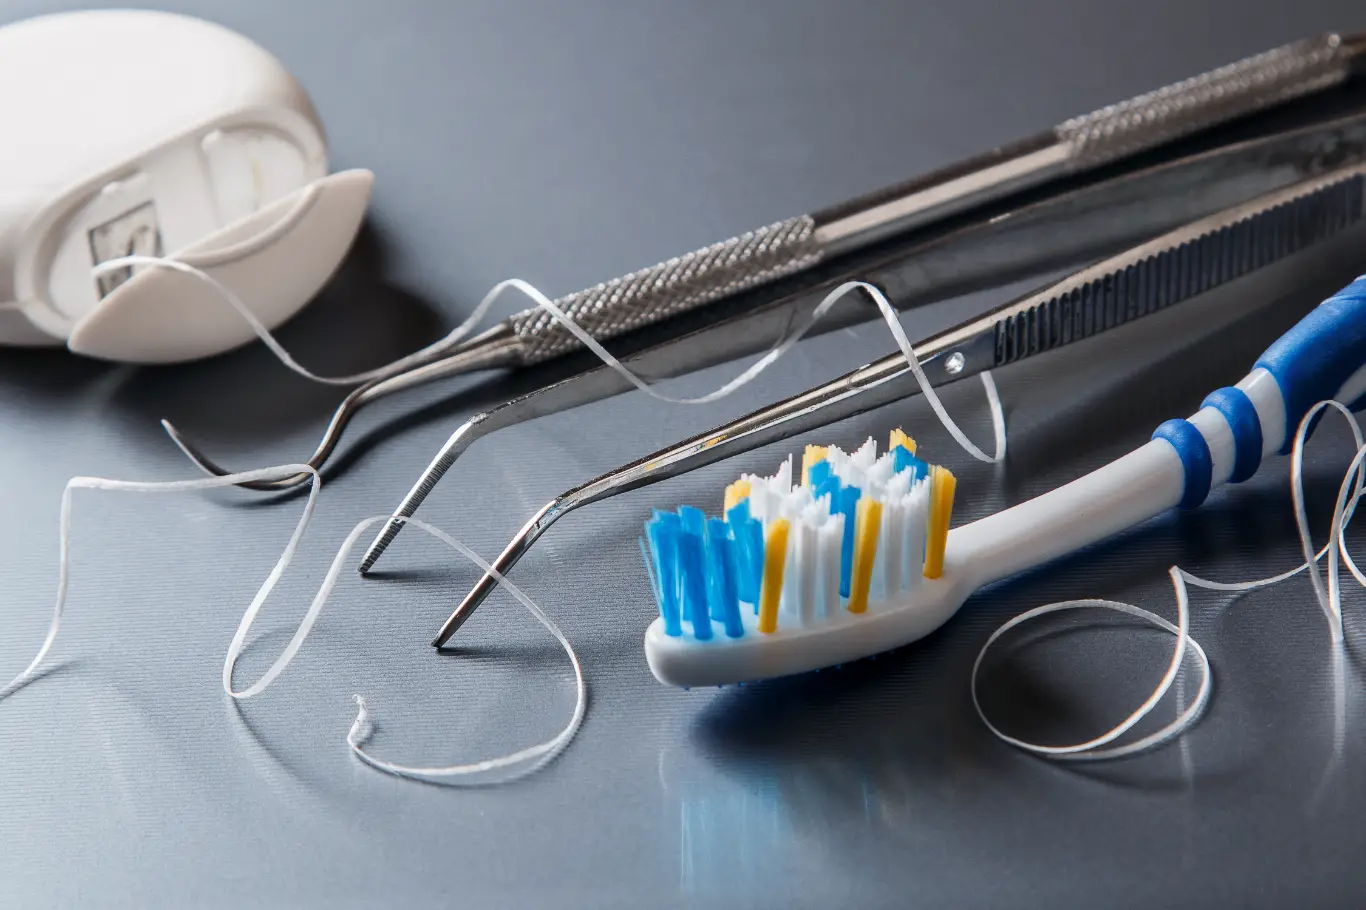 Different tools for dental care including floss and toothbrush.